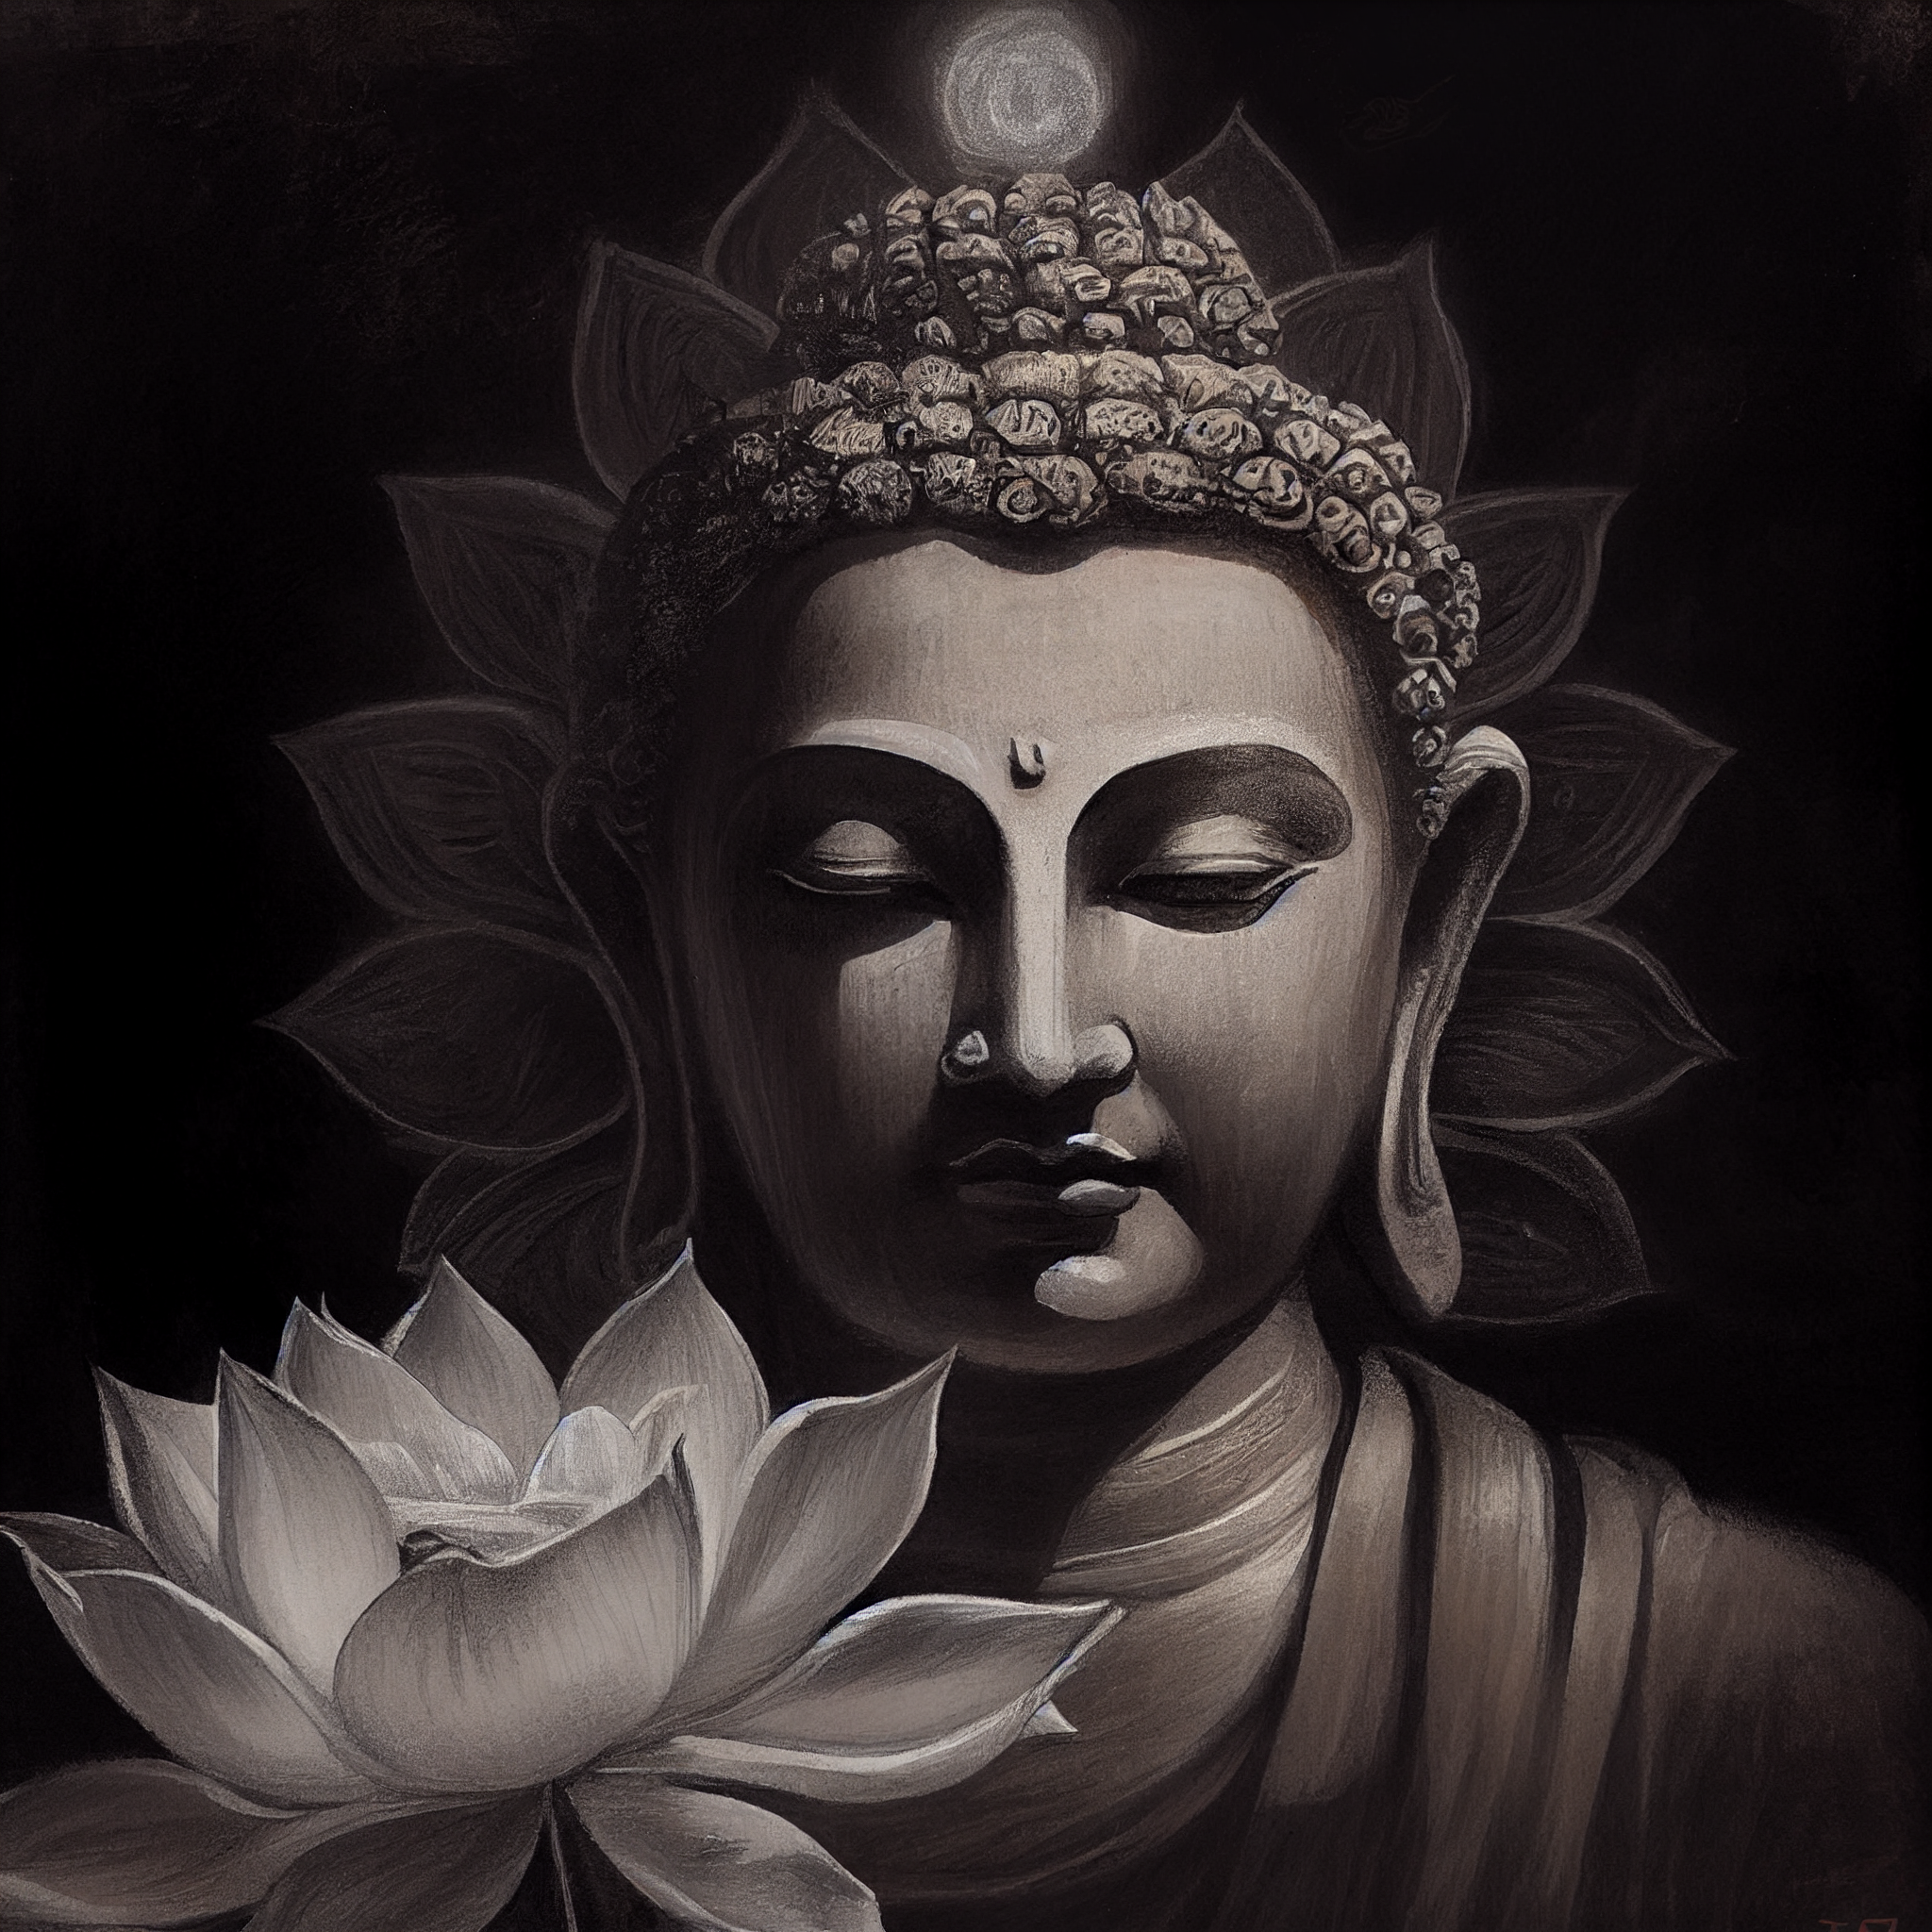 Enlightened Blossom: A Charcoal Portrait Print of Buddha's Serene Visage Adorned with a White Lotus Flower